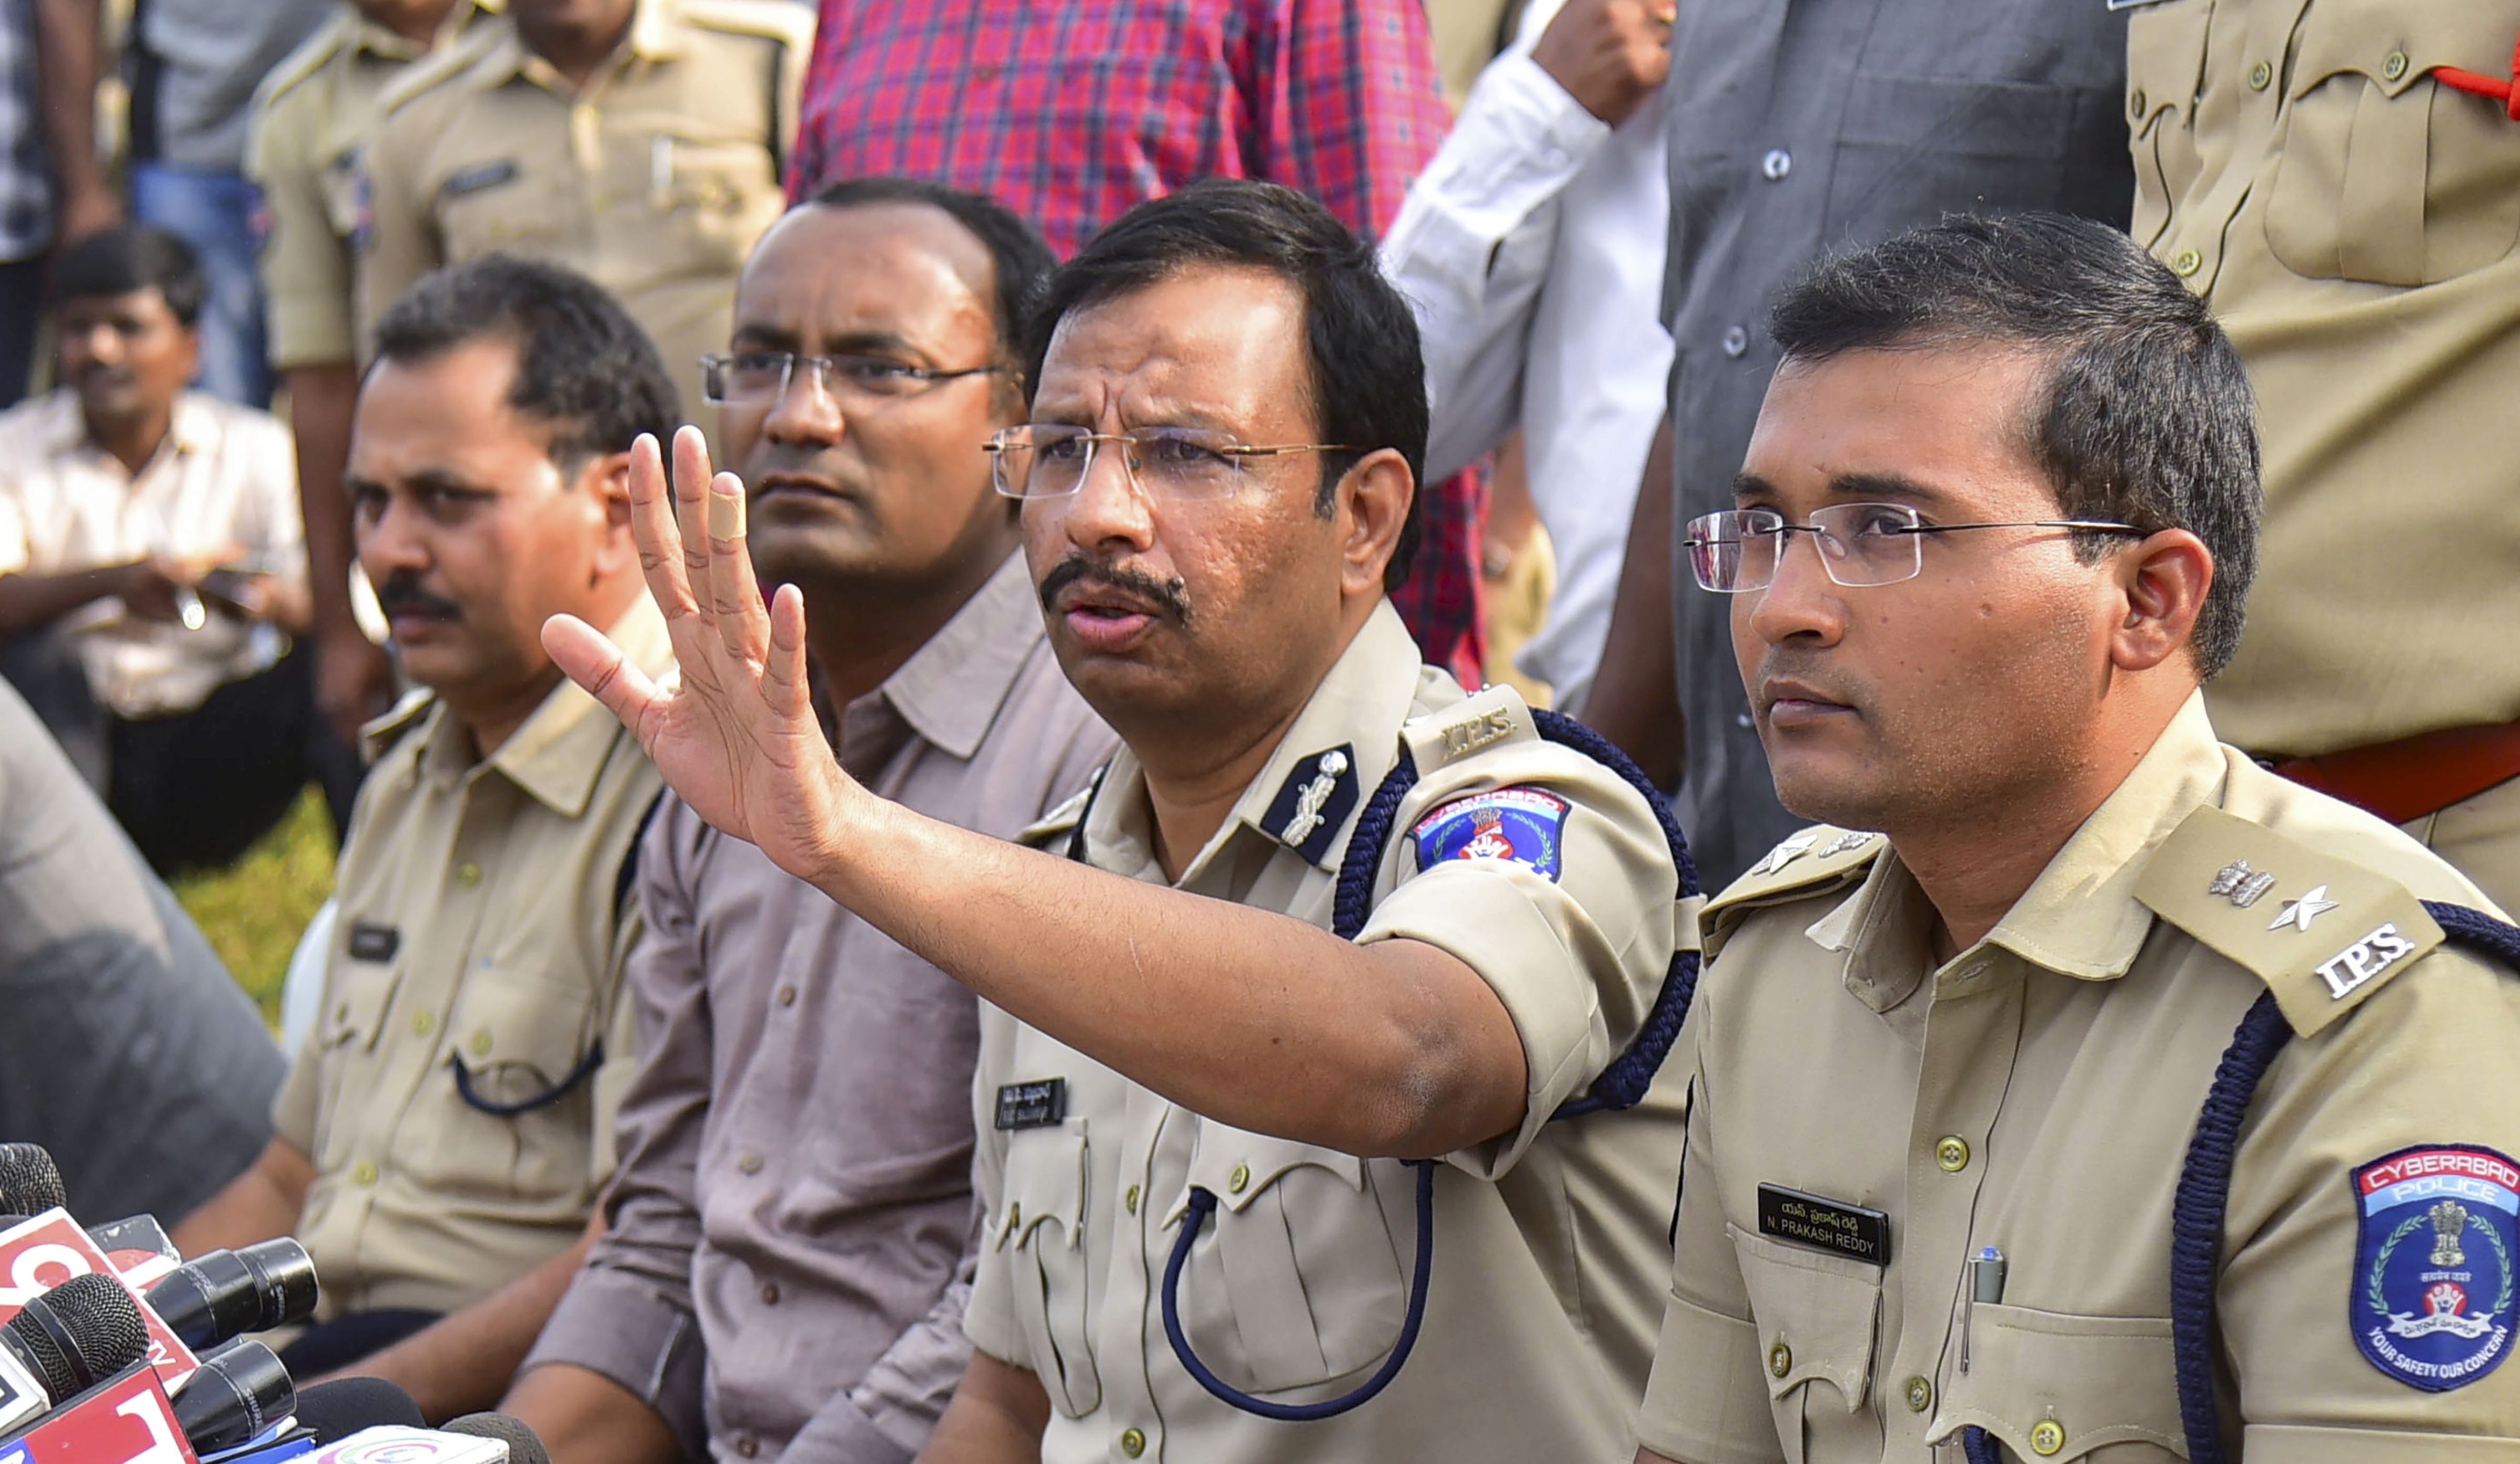 Cyberabad police commissioner V. C. Sajjanar, who carried out the encounter of the four accused in the Hyderabad veterinarian rape and murder case, addresses the media, in Hyderabad, Friday, December 6, 2019.